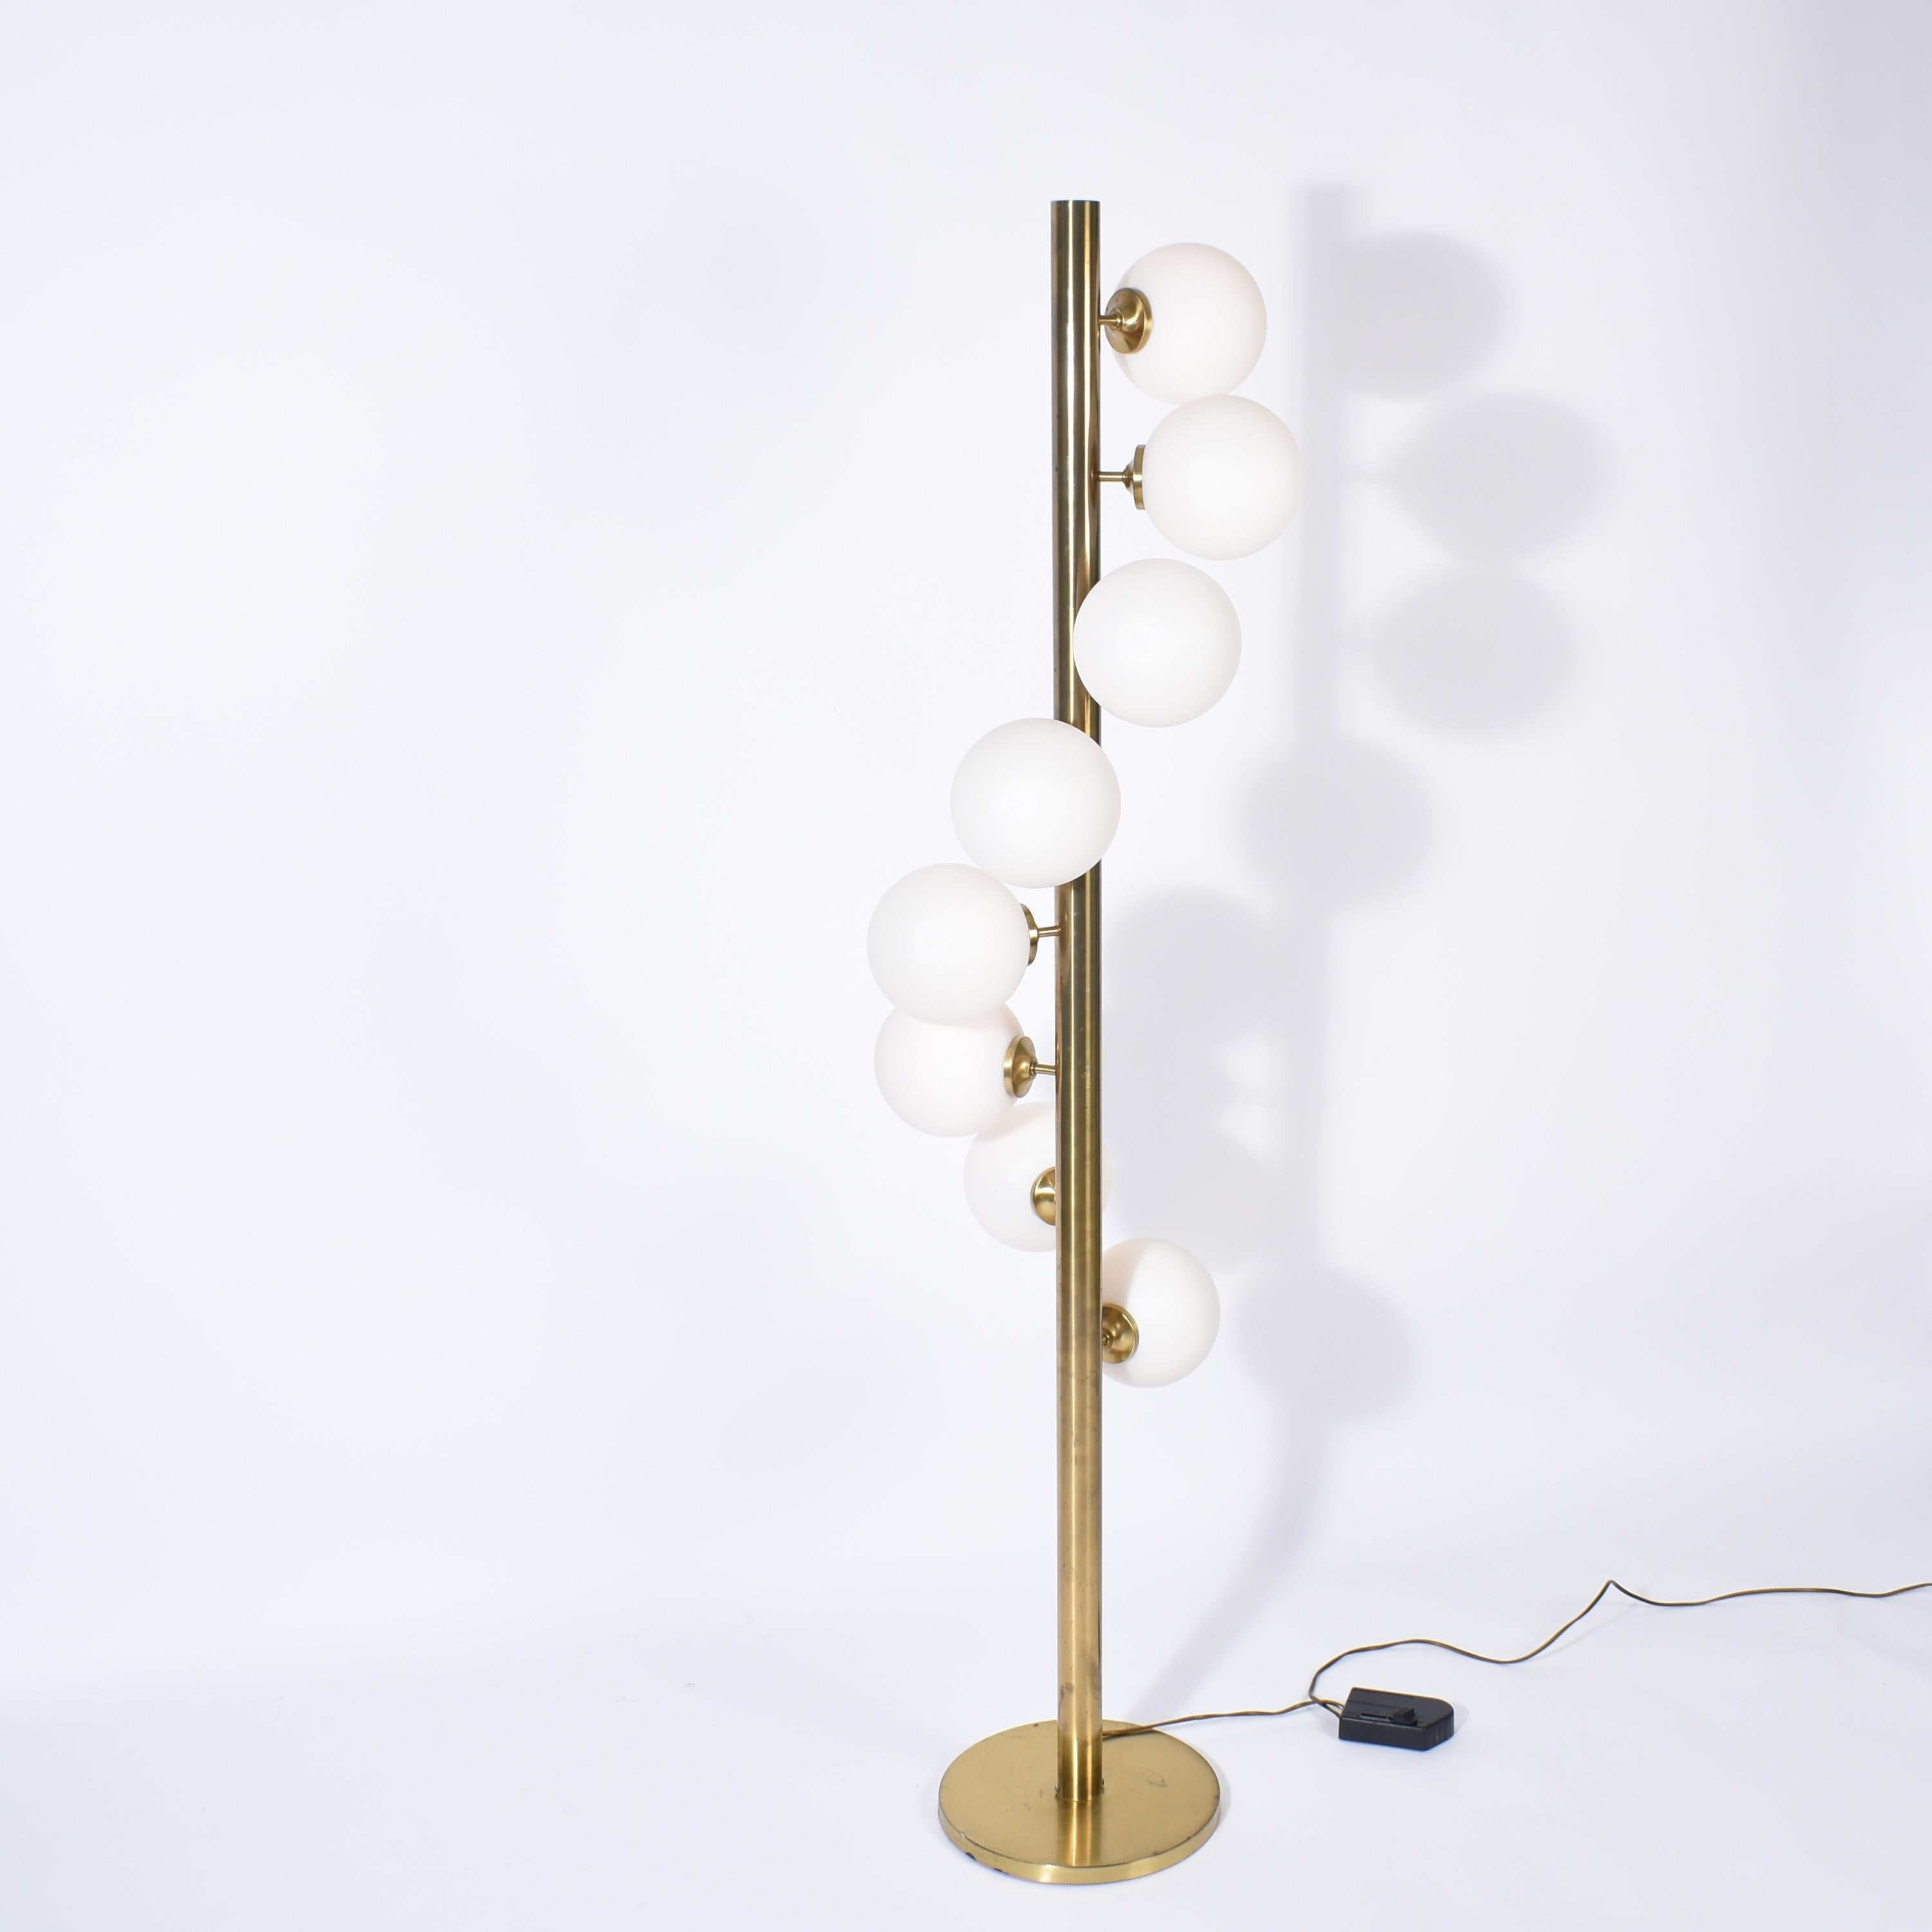 Big brass mid-century modern floor lamp.
It was designed and manufactured by Megal AG, in Switzerland, during the seventies.
Around the cylindric brass pole are disposed in spiral eight opaline spheres.
The design is very clean and elegant, with